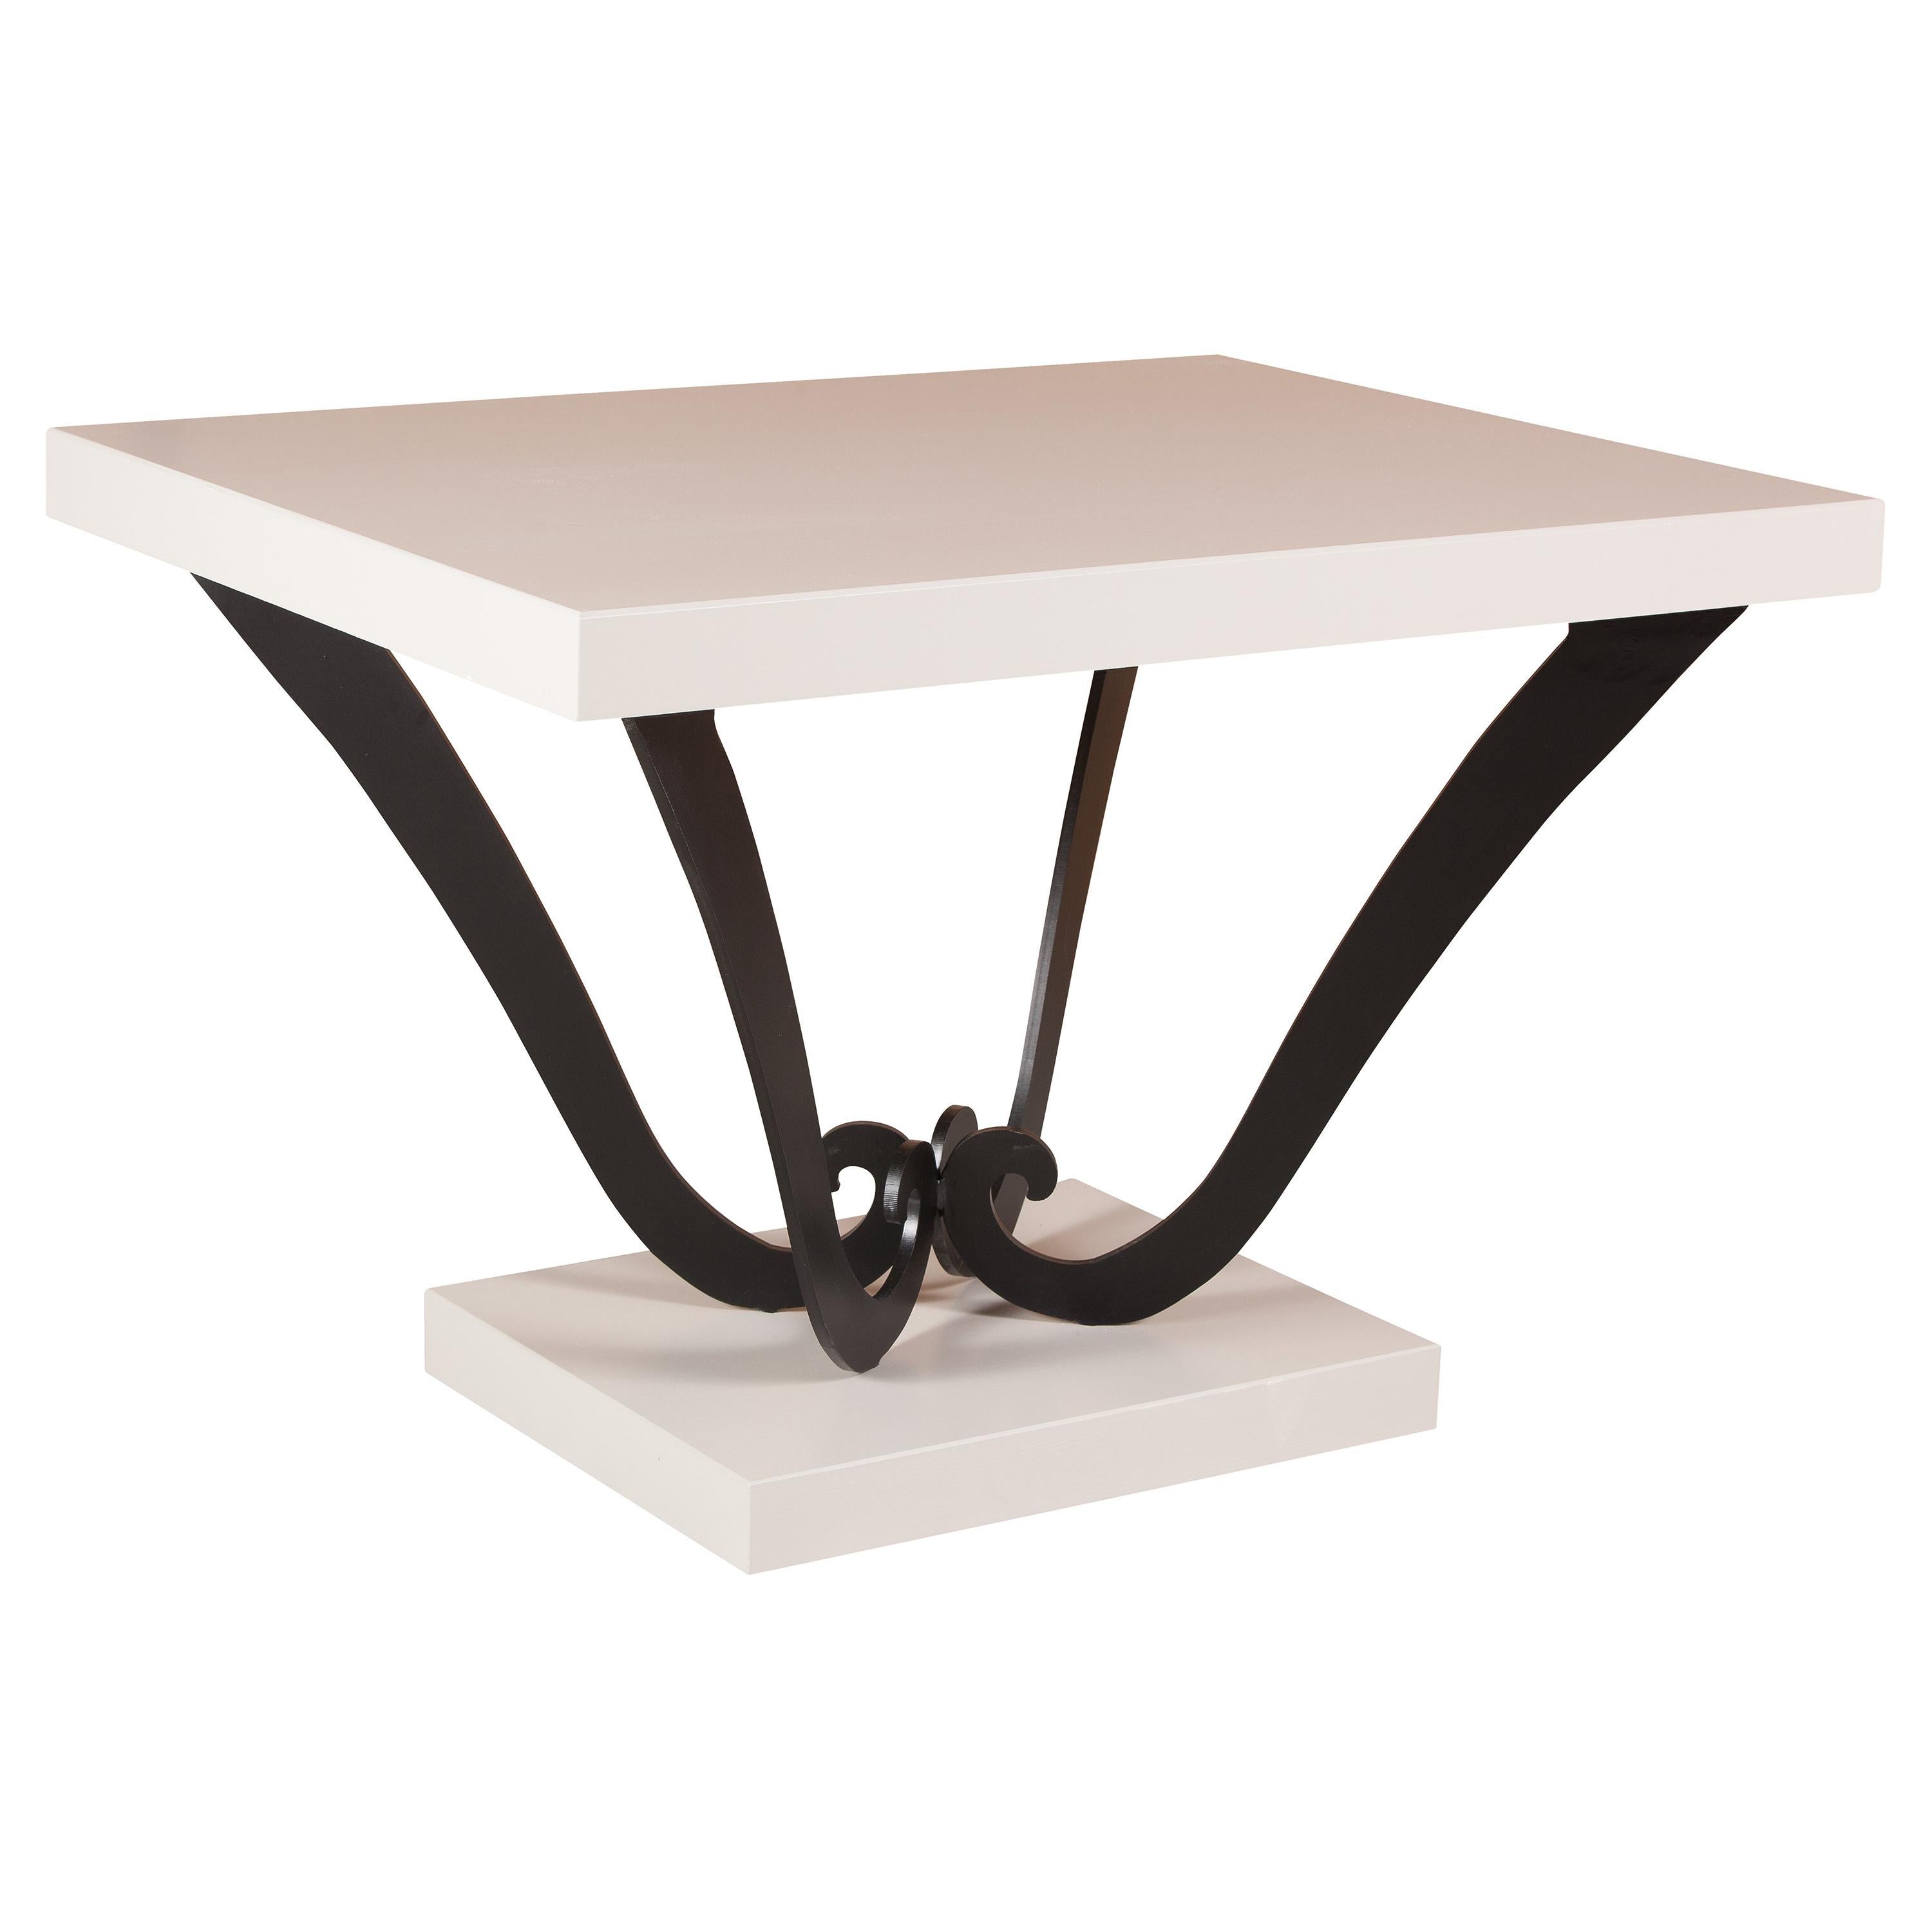 Isabella Costantini, Italy, Giada Side Table